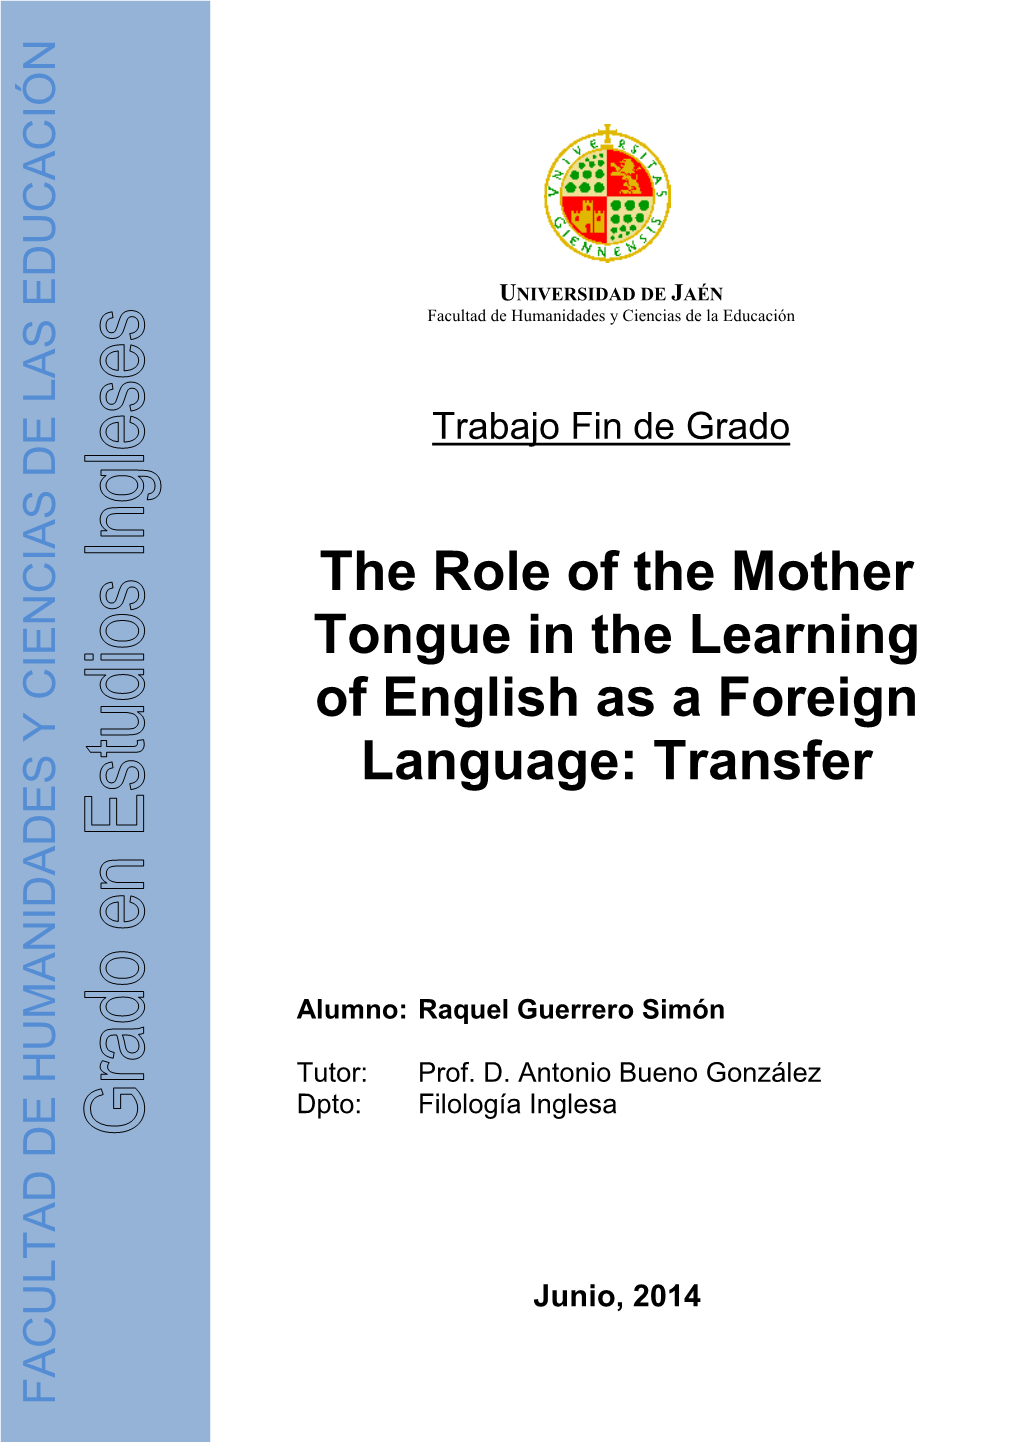 The Role of the Mother Tongue in the Learning of English As a Foreign Language: Transfer